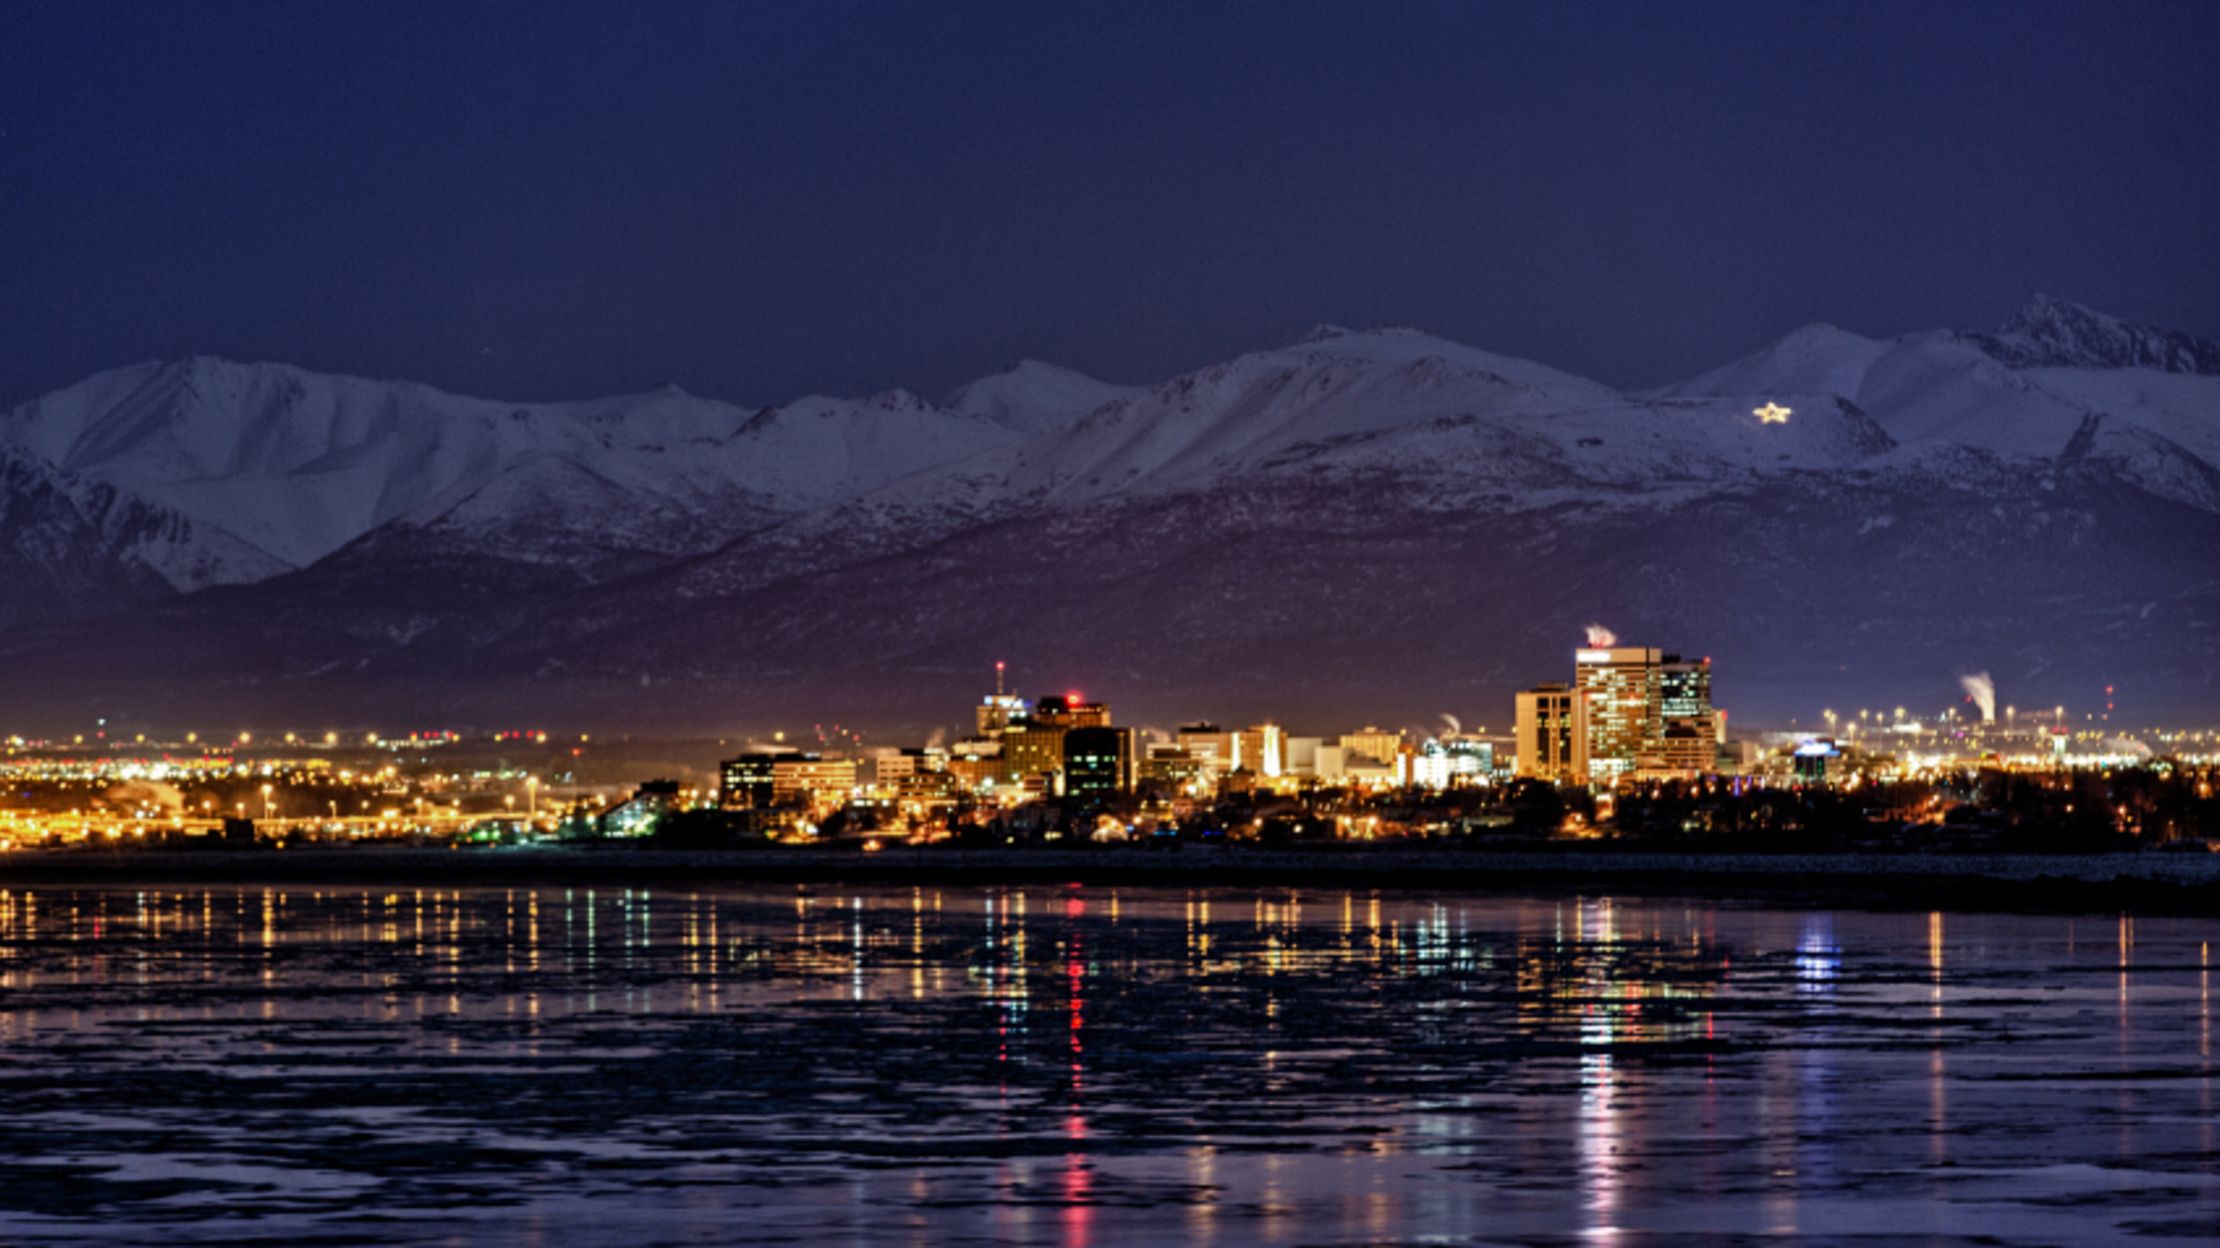 25 Things You Should Know About Anchorage Mental Floss